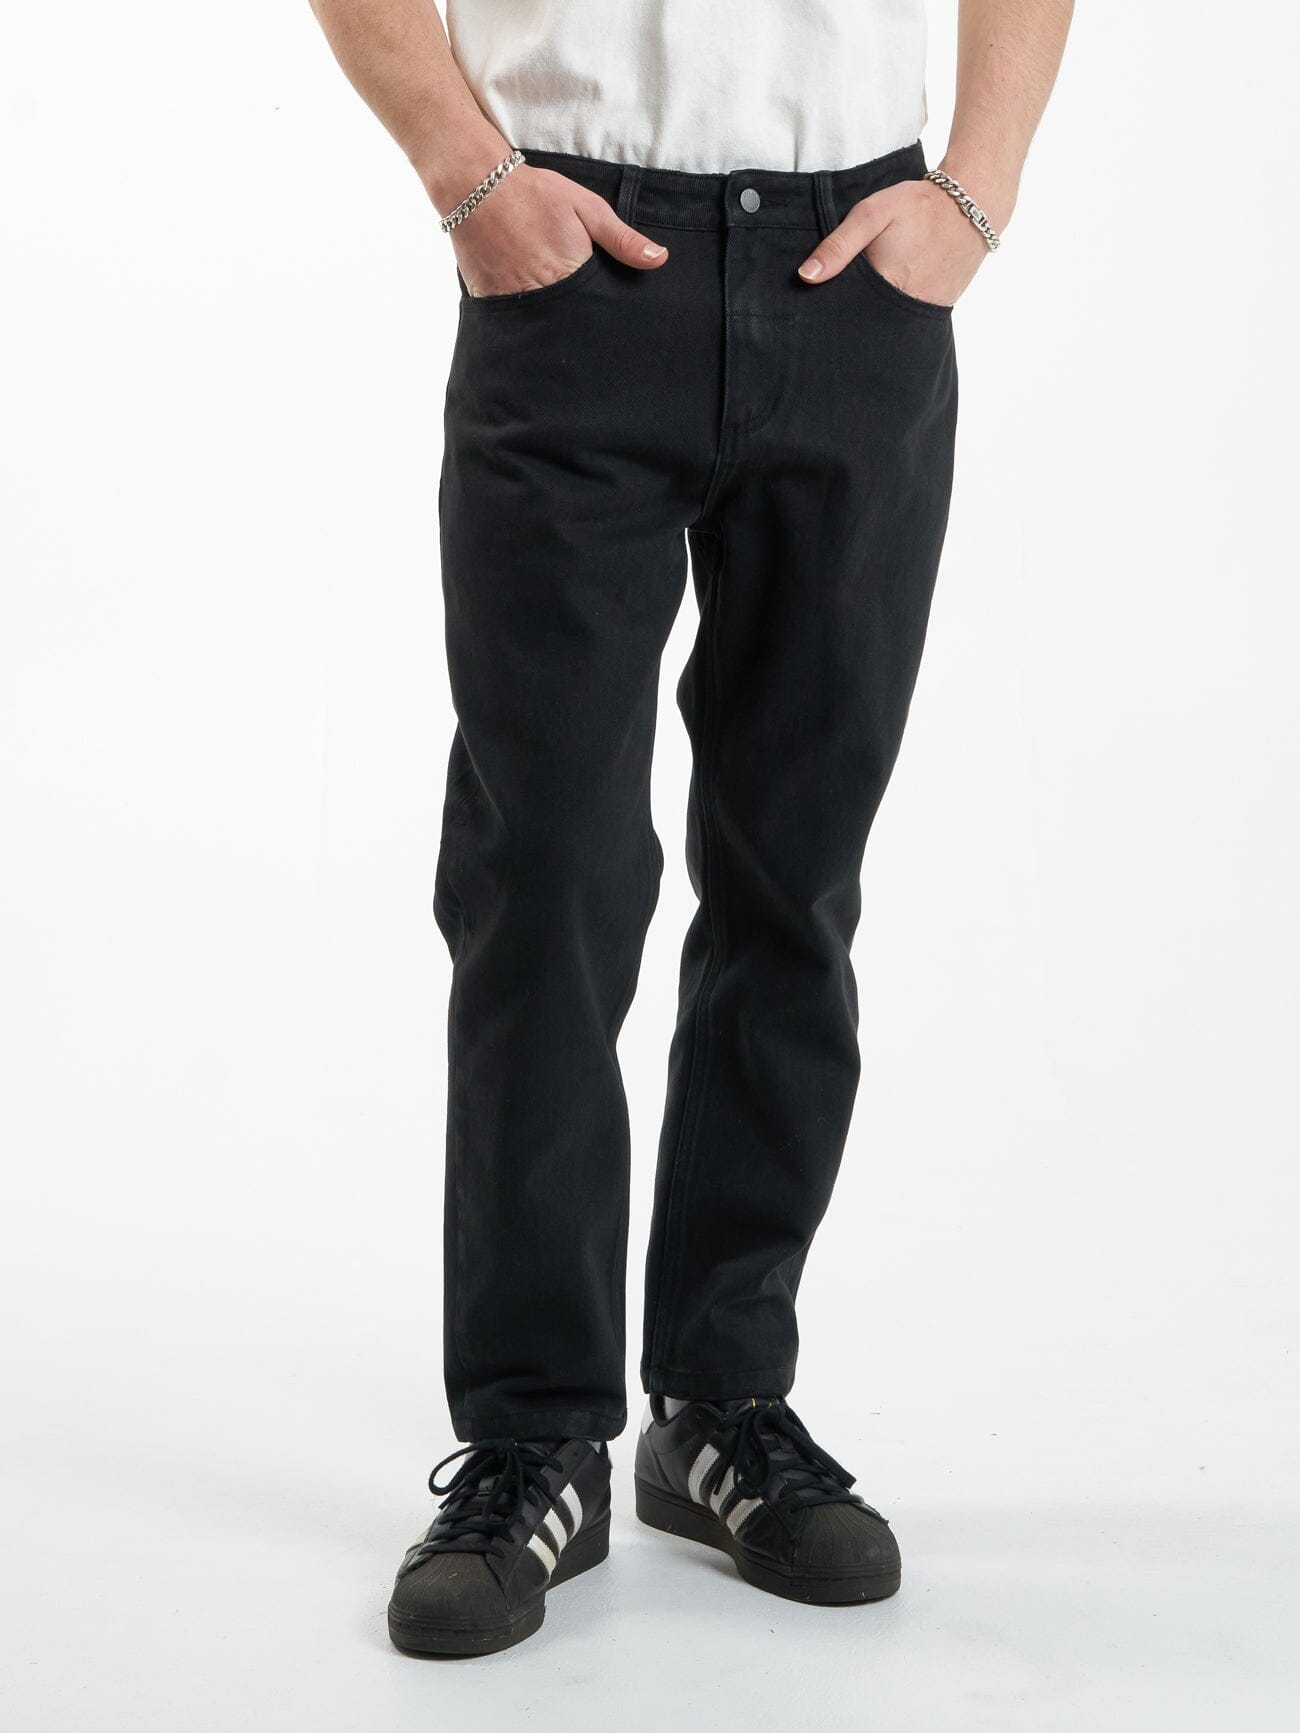 Men's Cropped Trousers  Skinny & Slim Fit Cropped Trousers